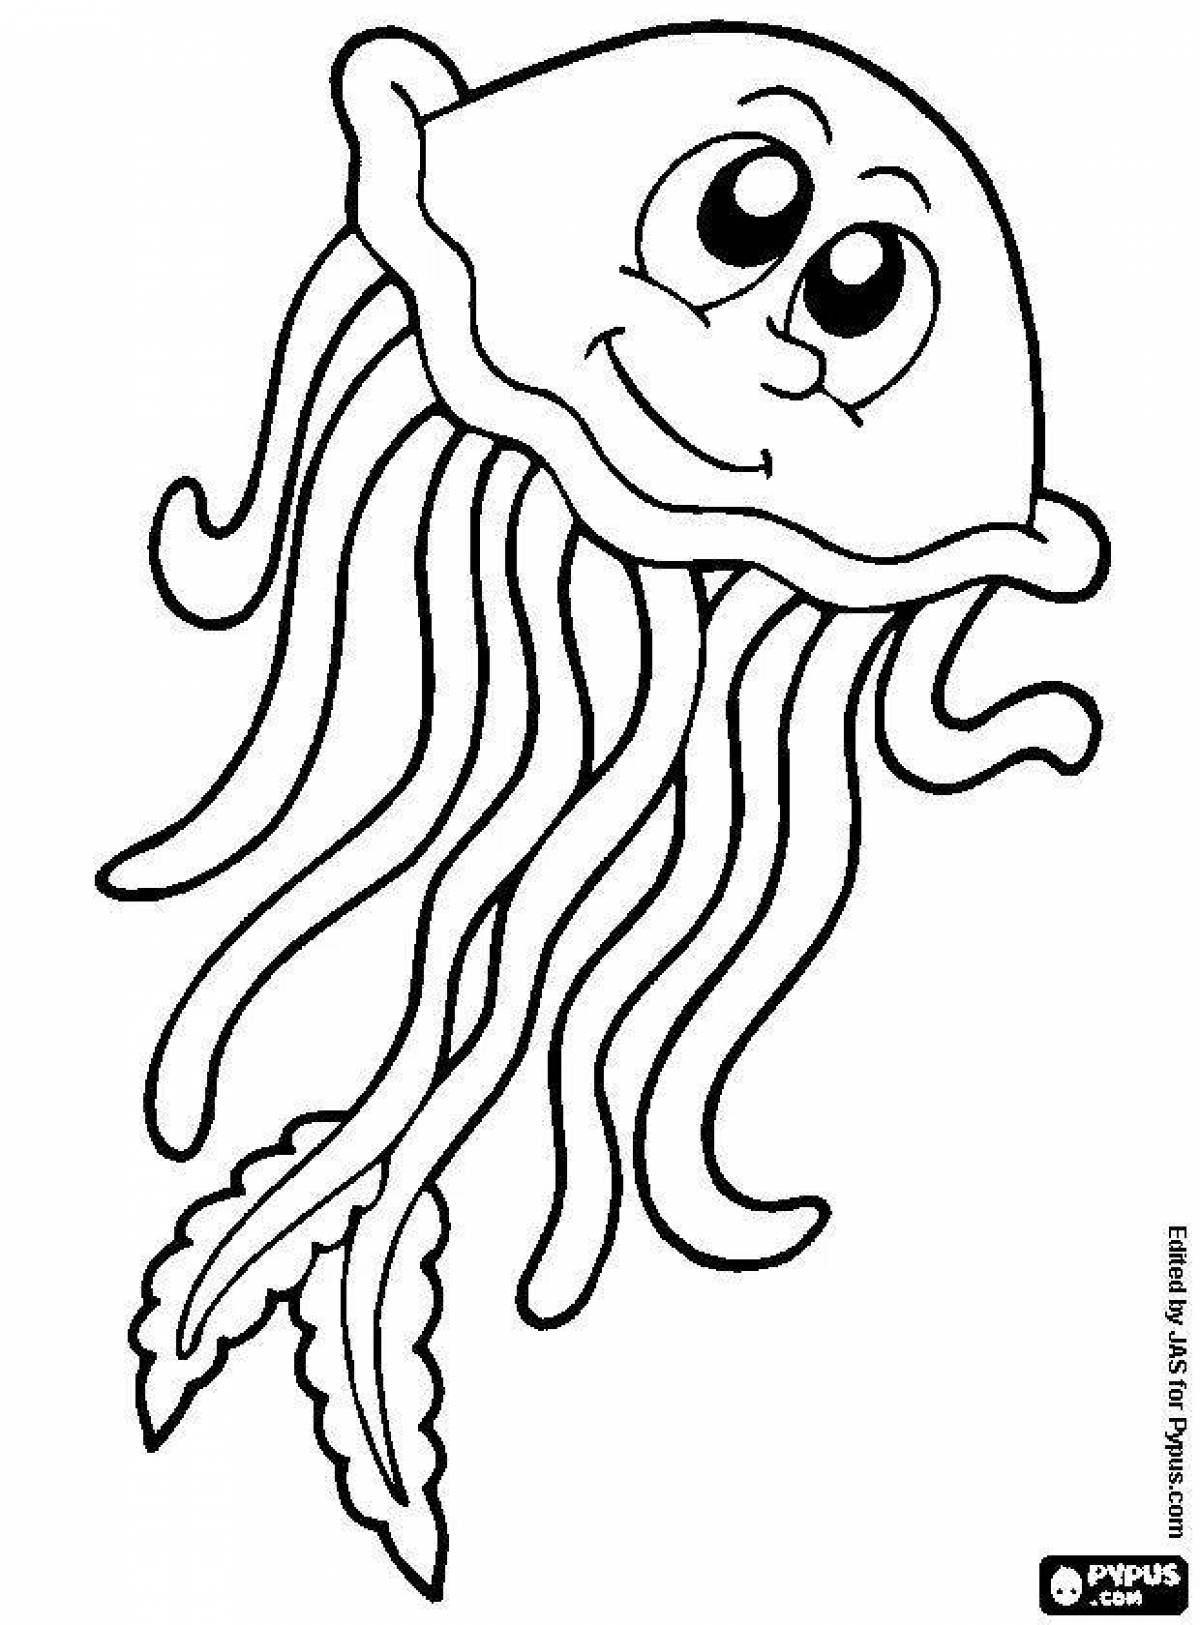 Coloring book shining jellyfish for kids